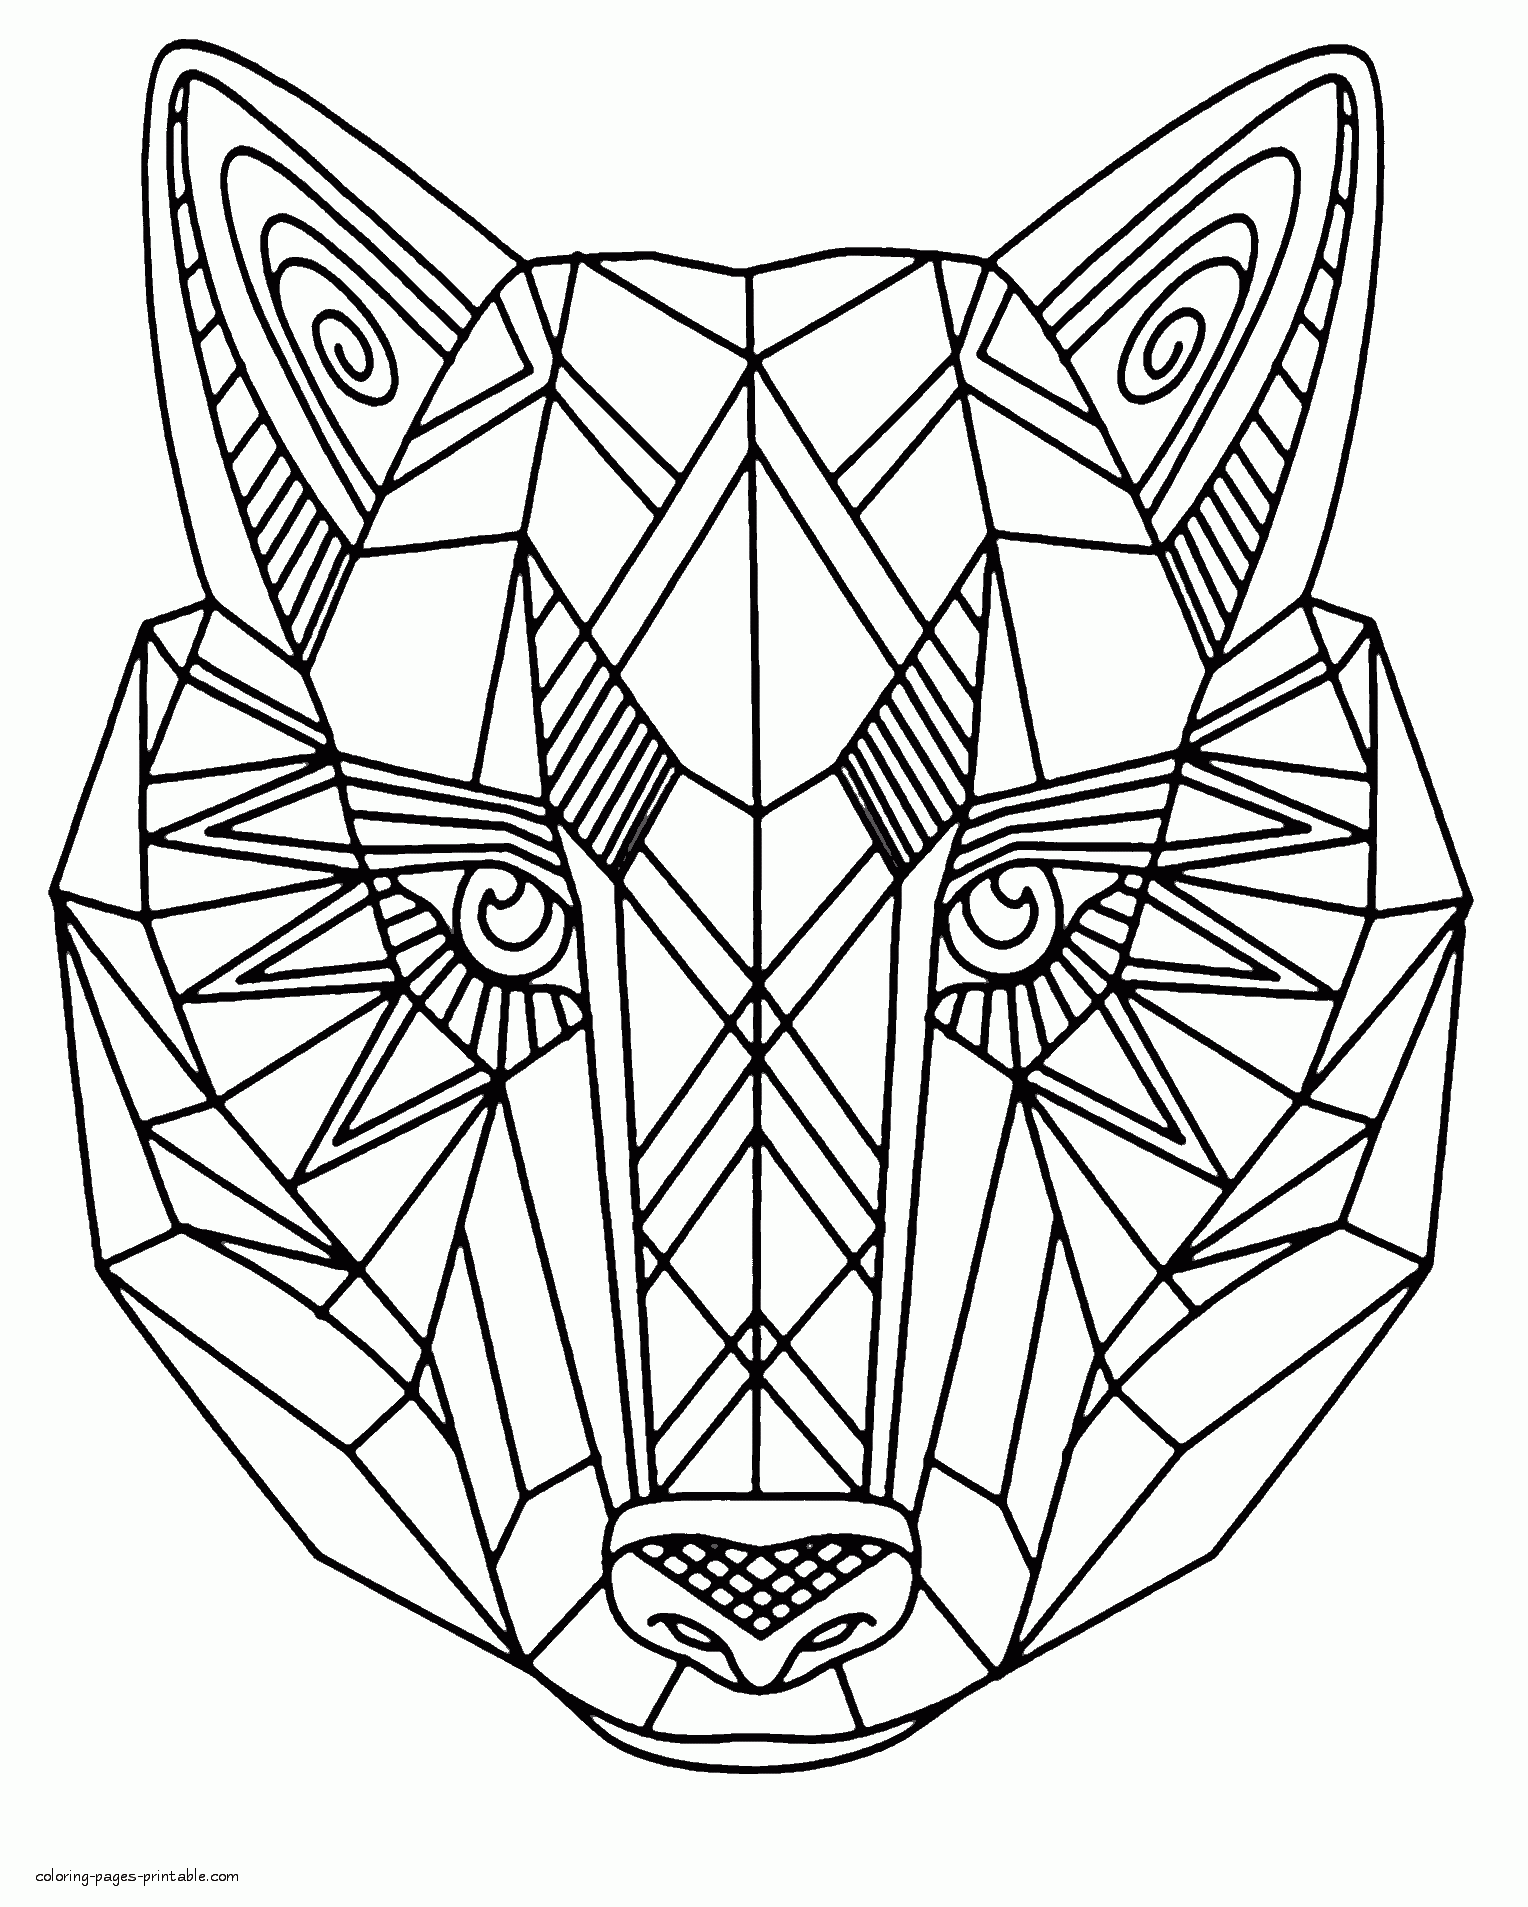 Zentangle Animal Face Coloring For Adults || COLORING-PAGES-PRINTABLE.COM